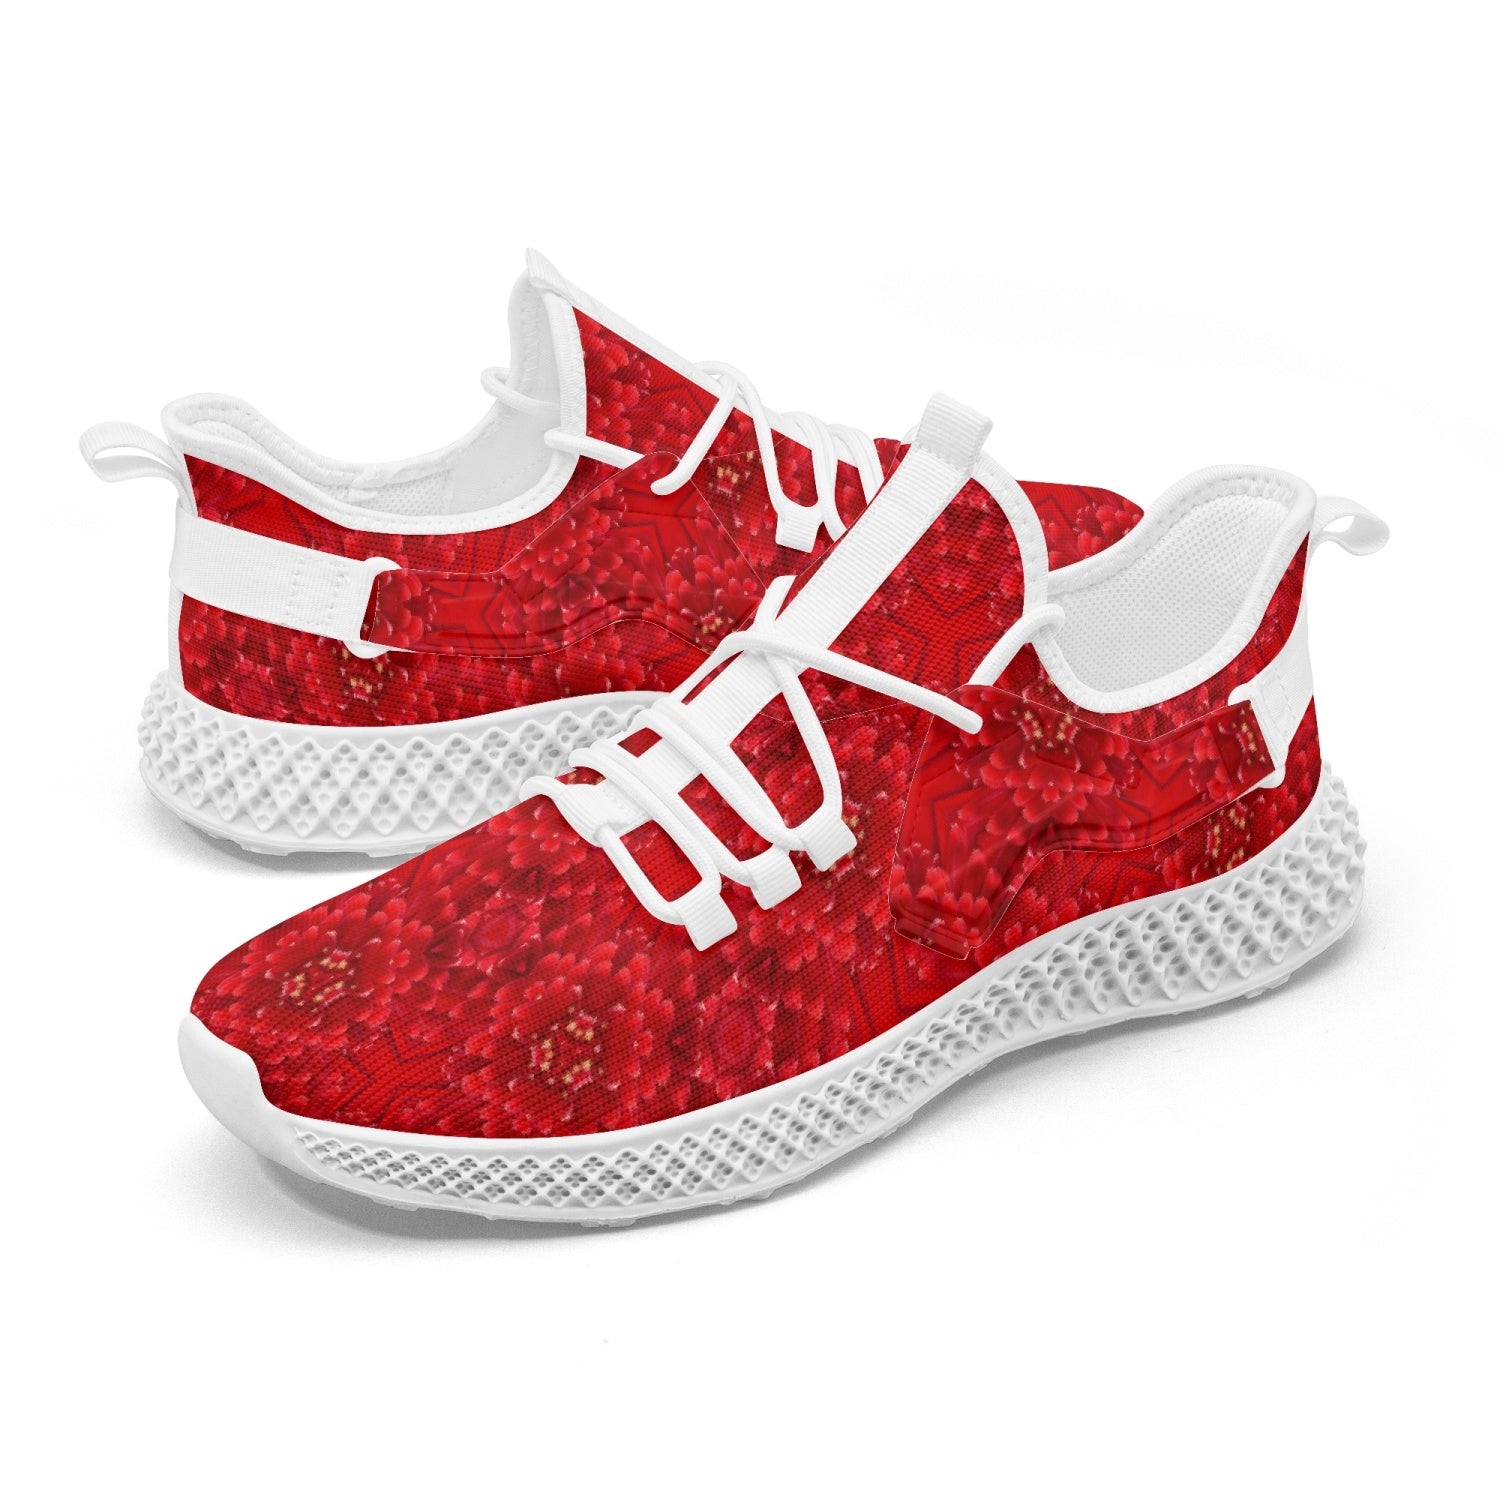 Red Root Chacra, Net Style Mesh Knit Sneakers, by Sensus Studio Design